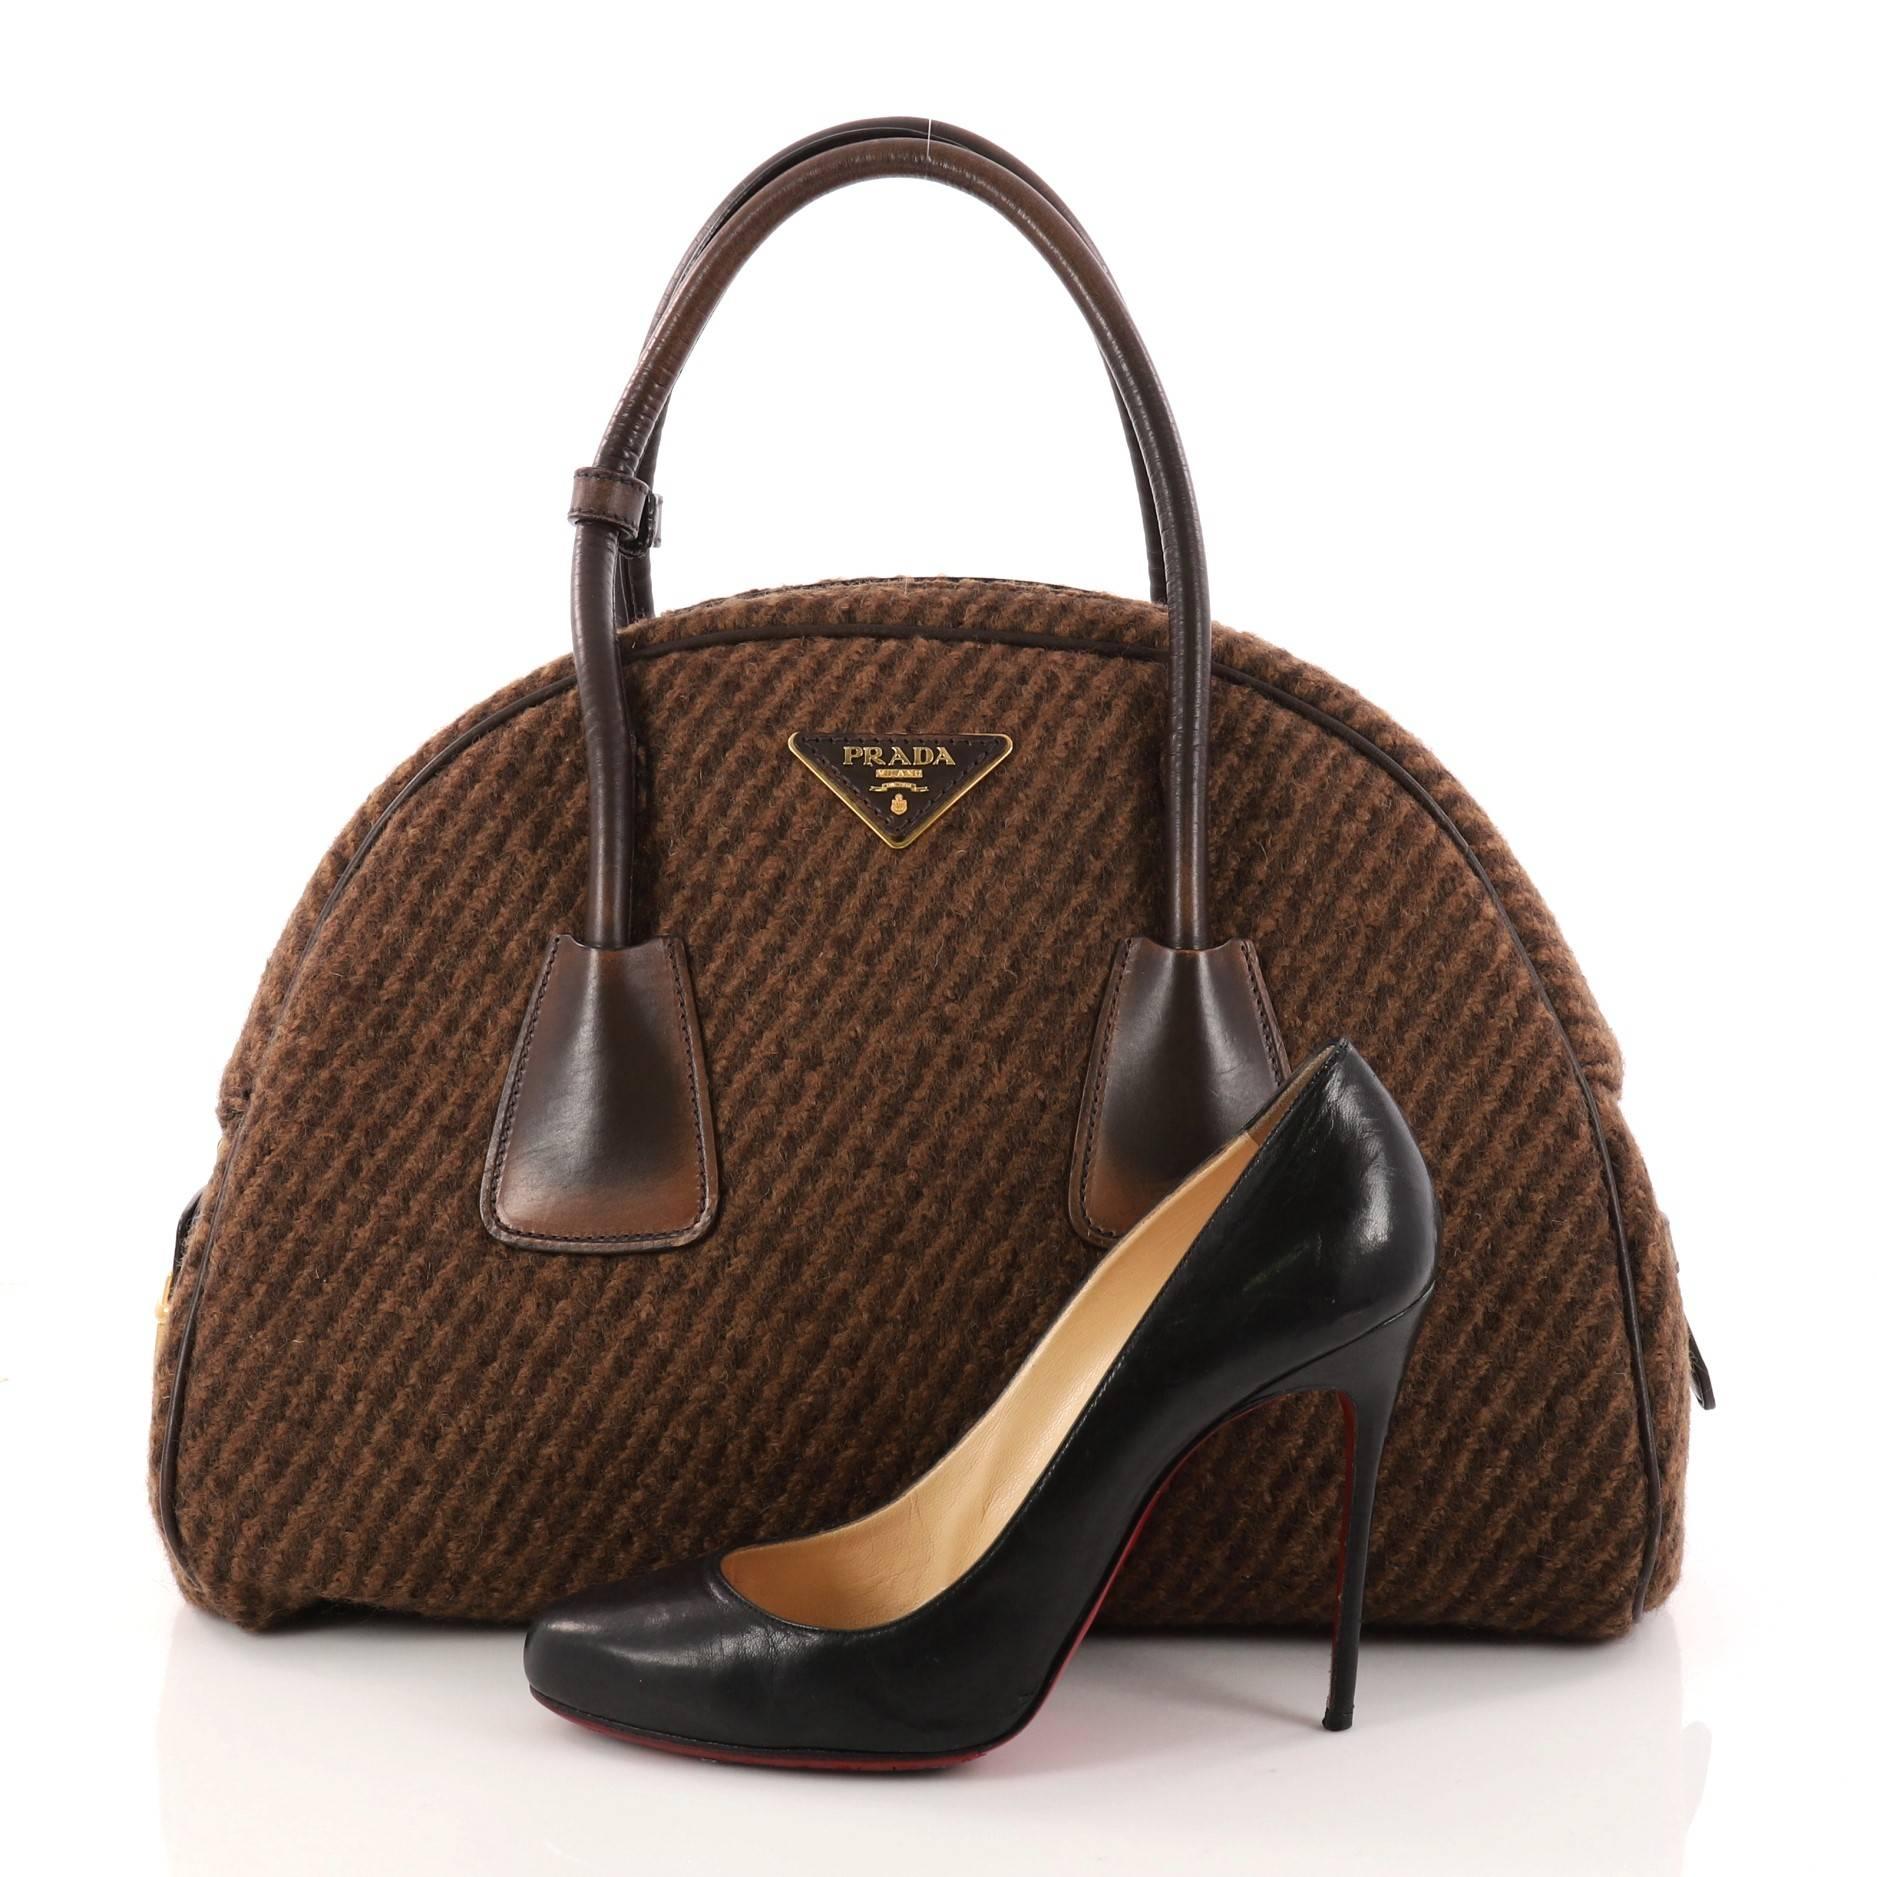 This authentic Prada Vichy Vintage Bowler Bag Tweed Large is an elegant eye-catching accessory made for every fashionista. Crafted from brown tweed, this bag features stained dual-rolled handles, triangular Prada logo at top center, protective base